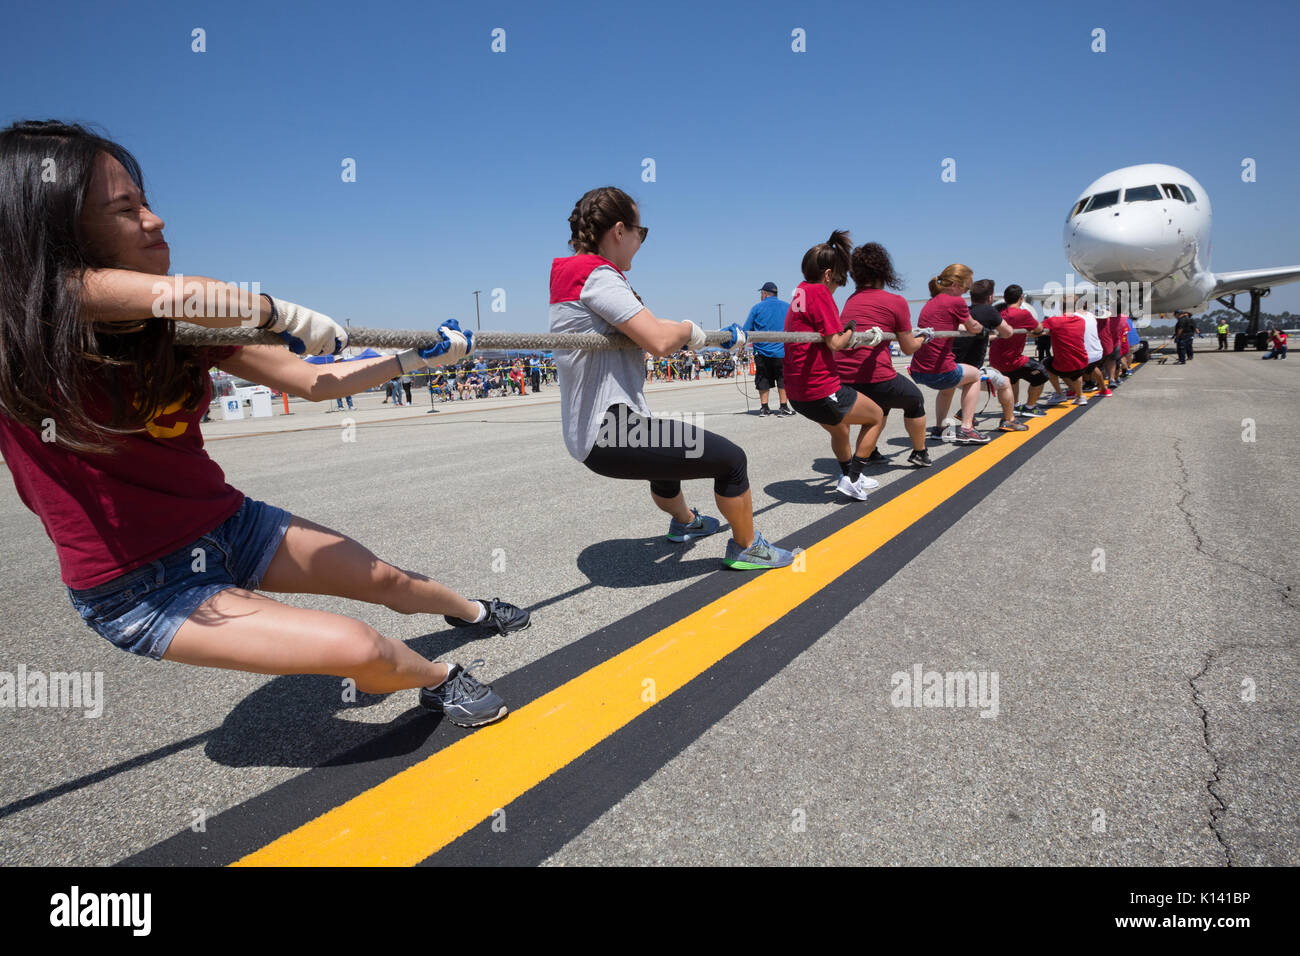 19 agosto 2017 - La University of Southern California Team compete in Special Olympics Southern California piano tirare a Long Beach Airport Foto Stock